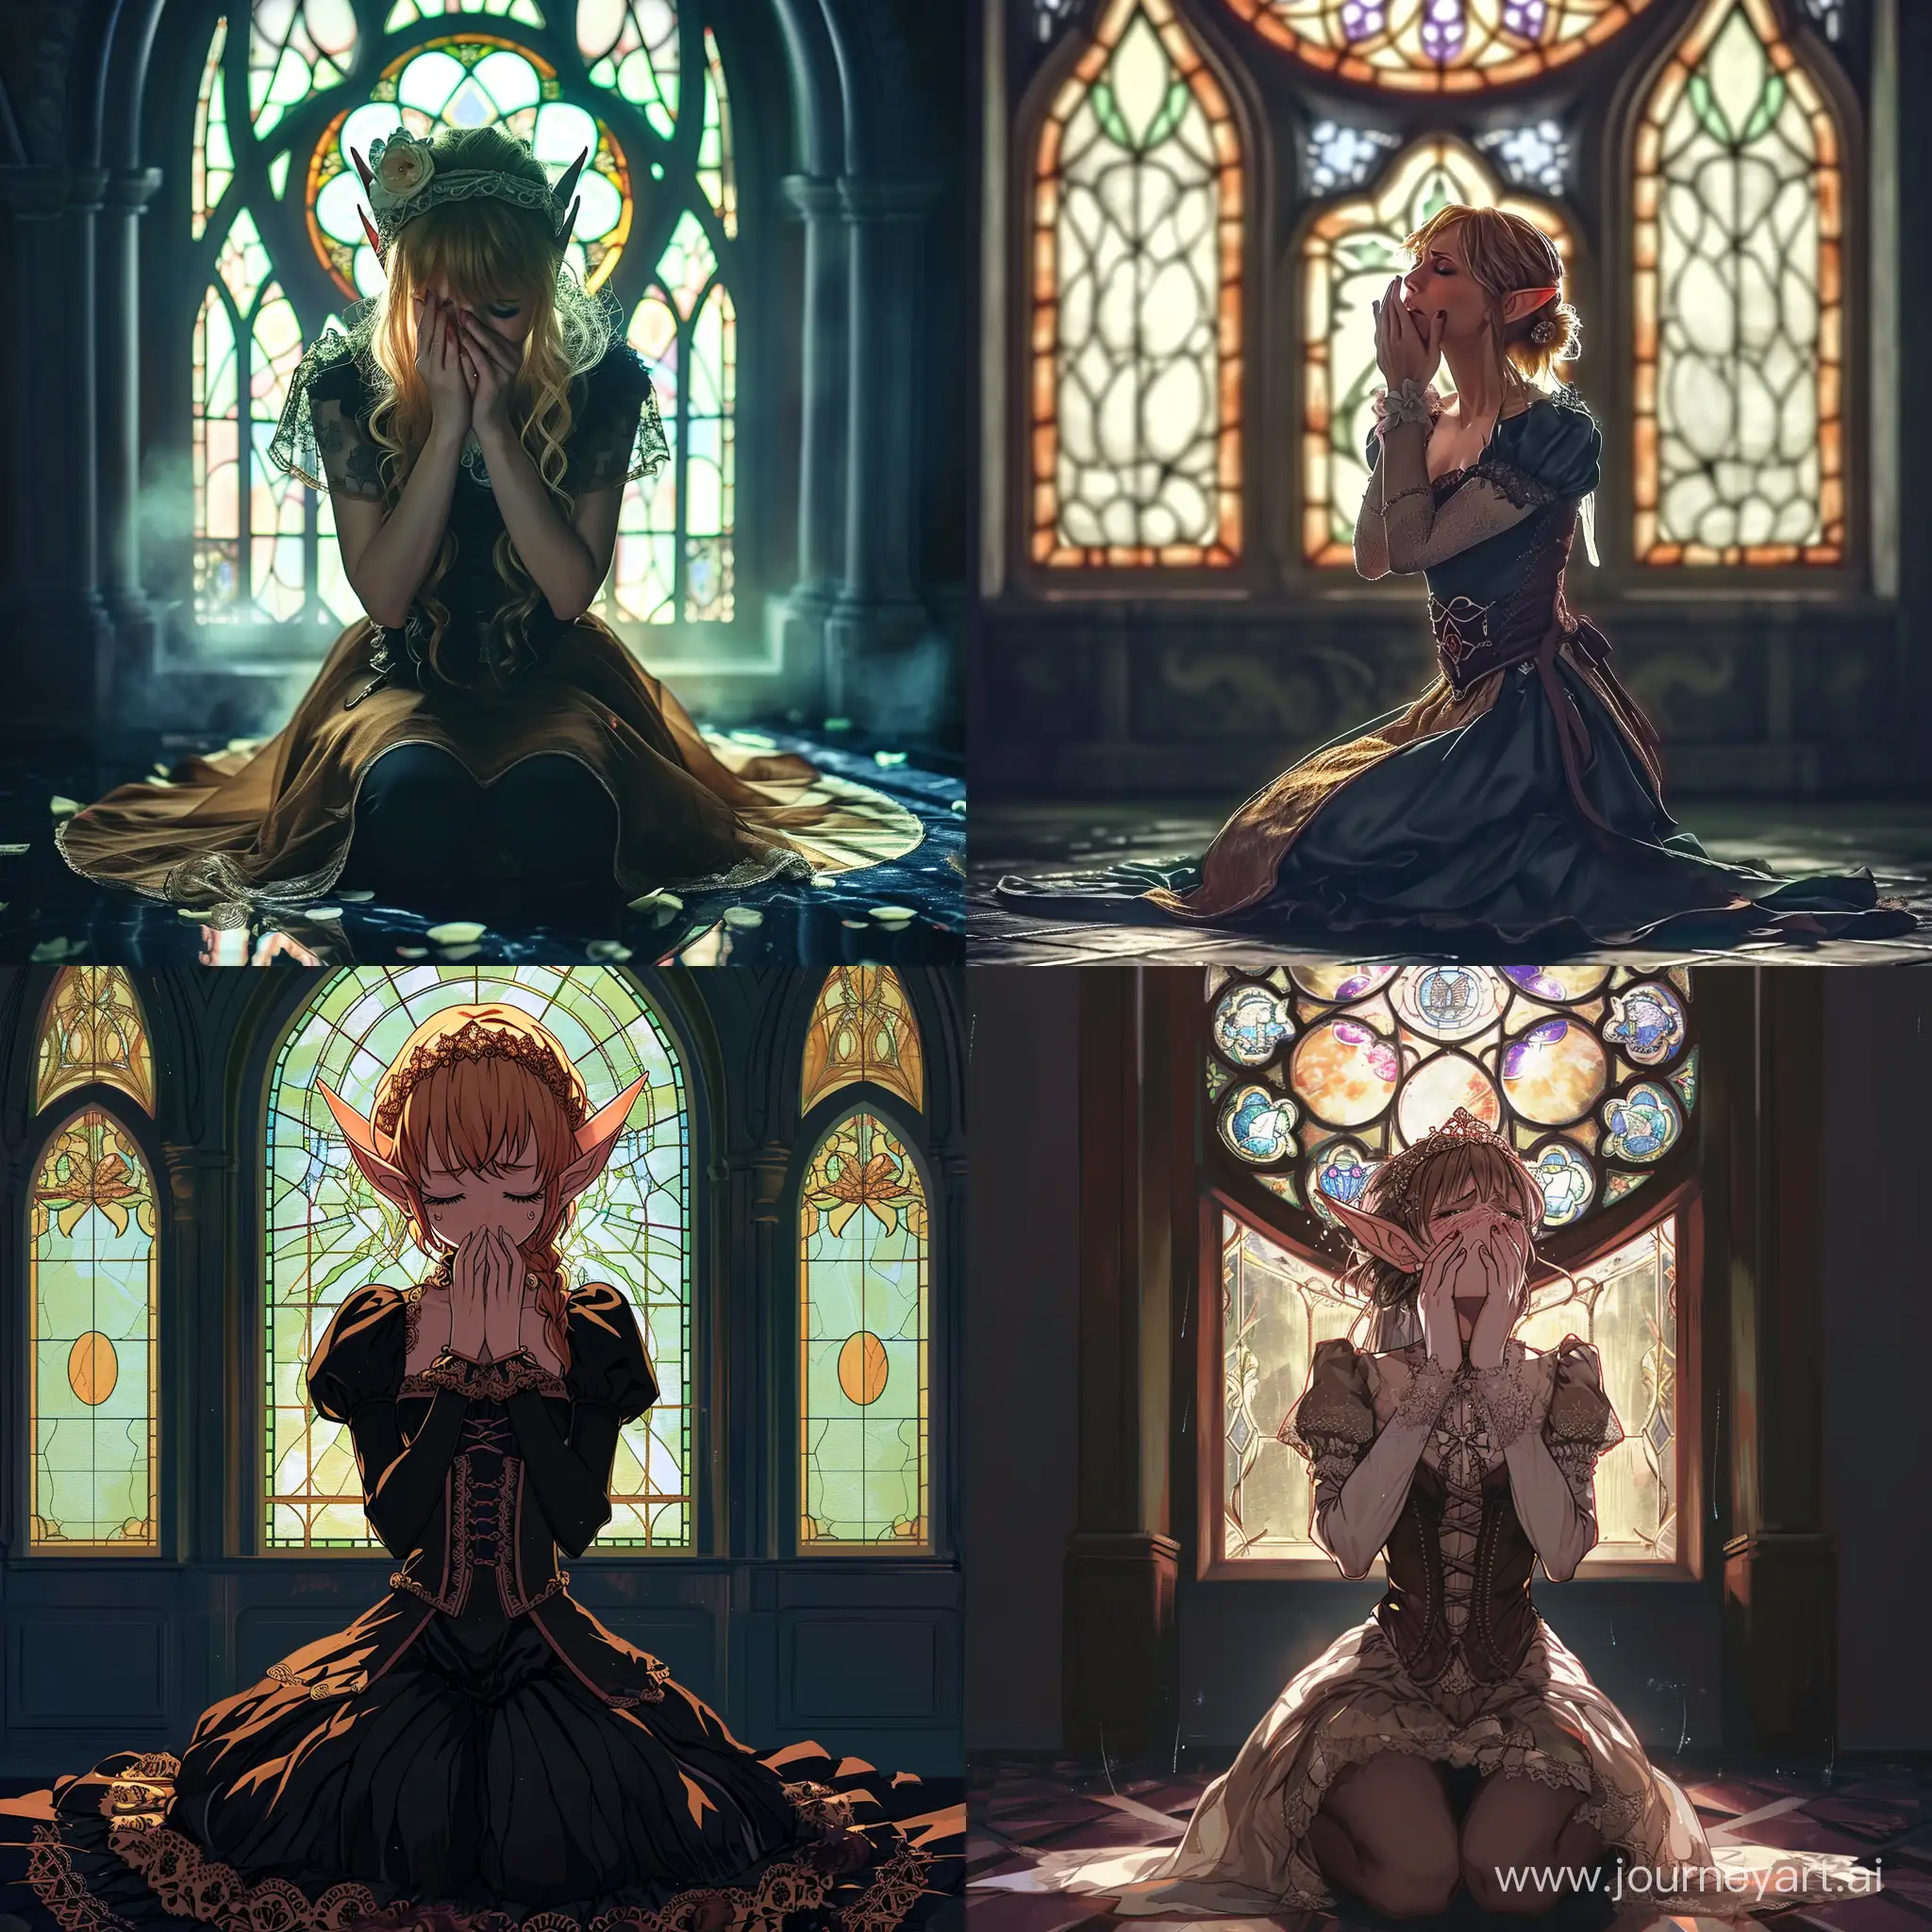 Victorian-Anime-Elf-Princess-in-Tearful-Repose-by-Stained-Glass-Window